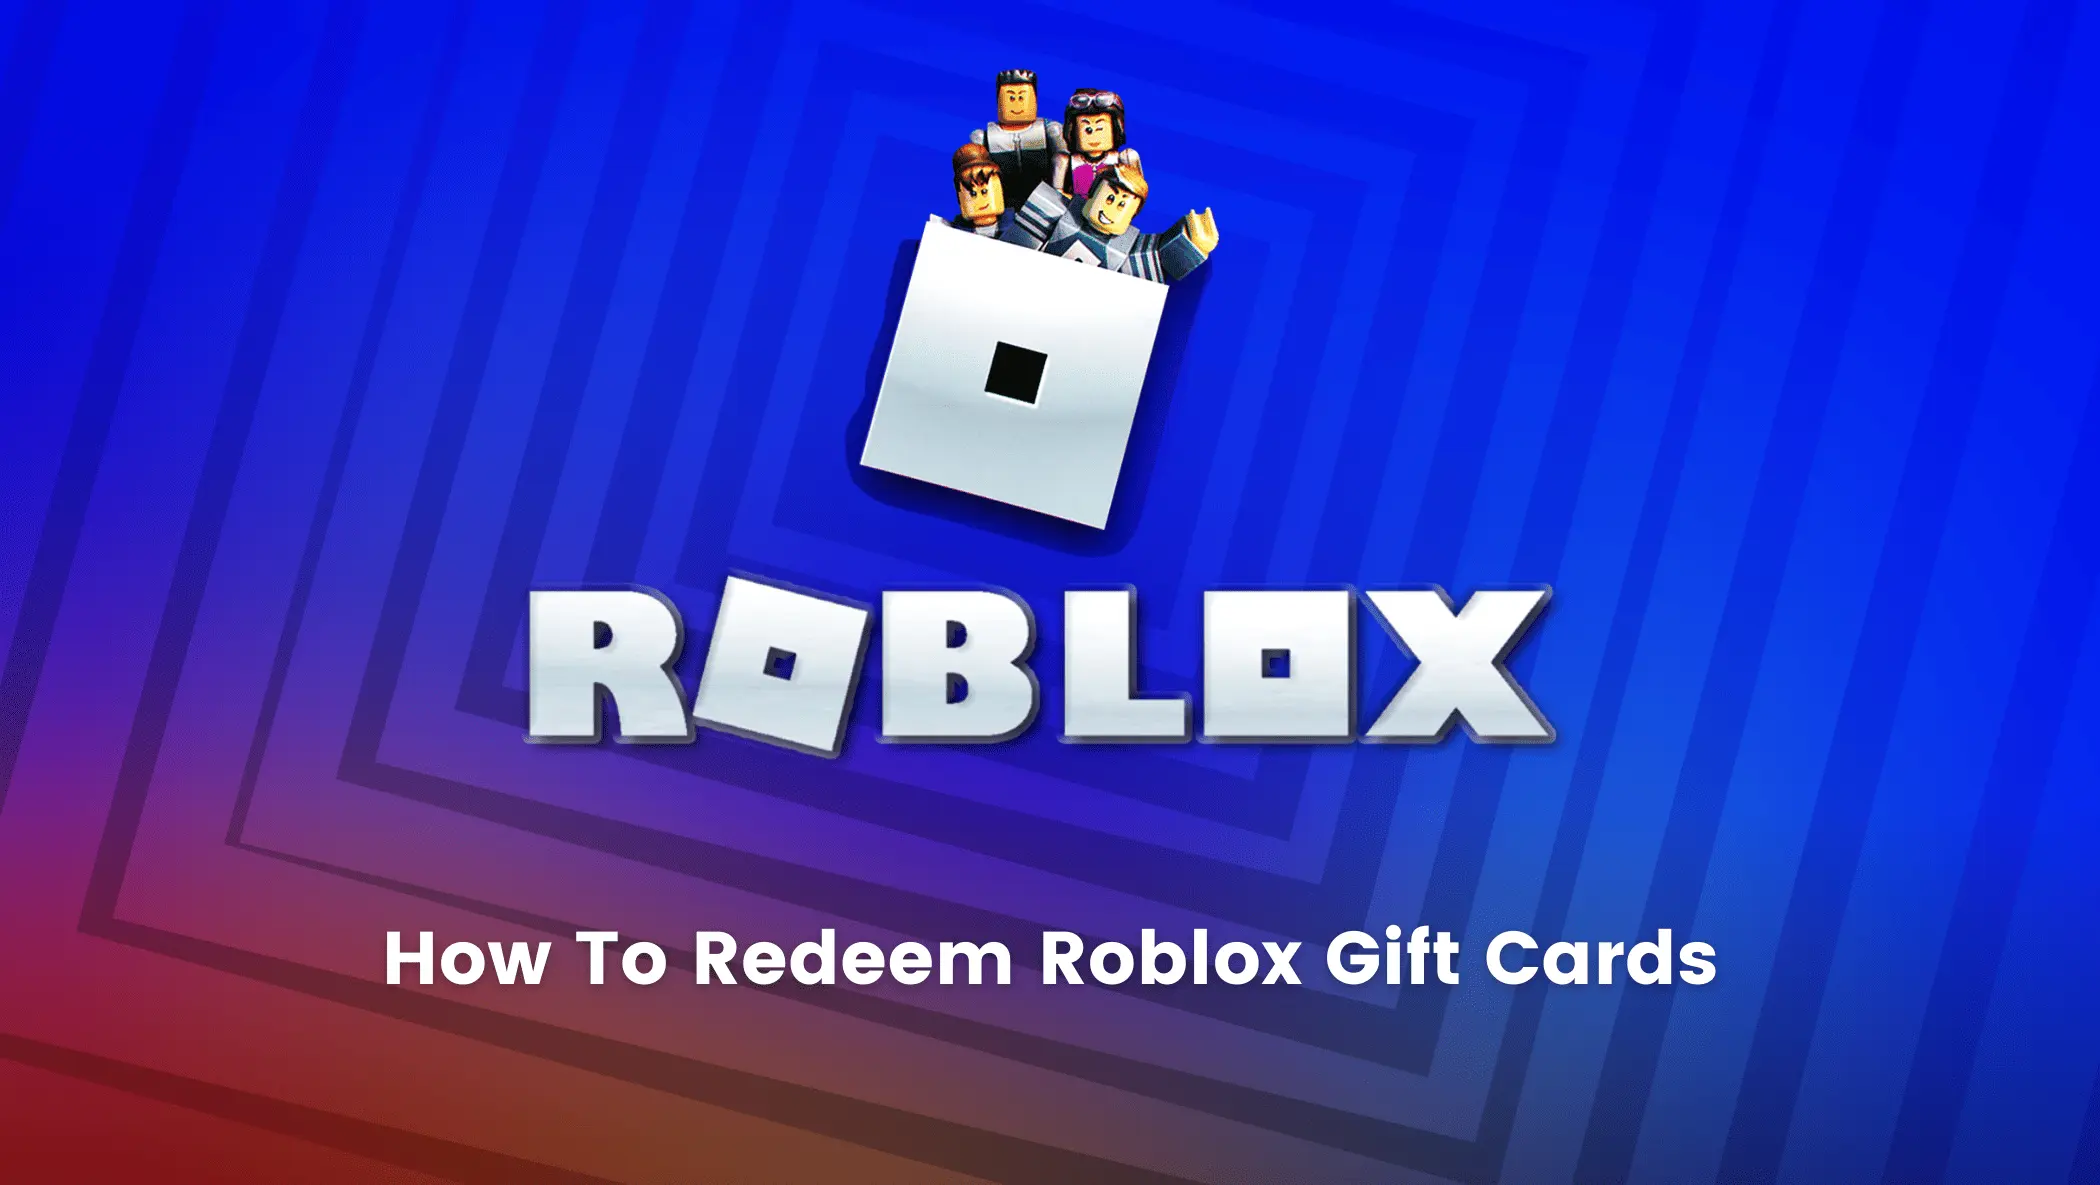 Redeem-Roblox-Gift-Cards